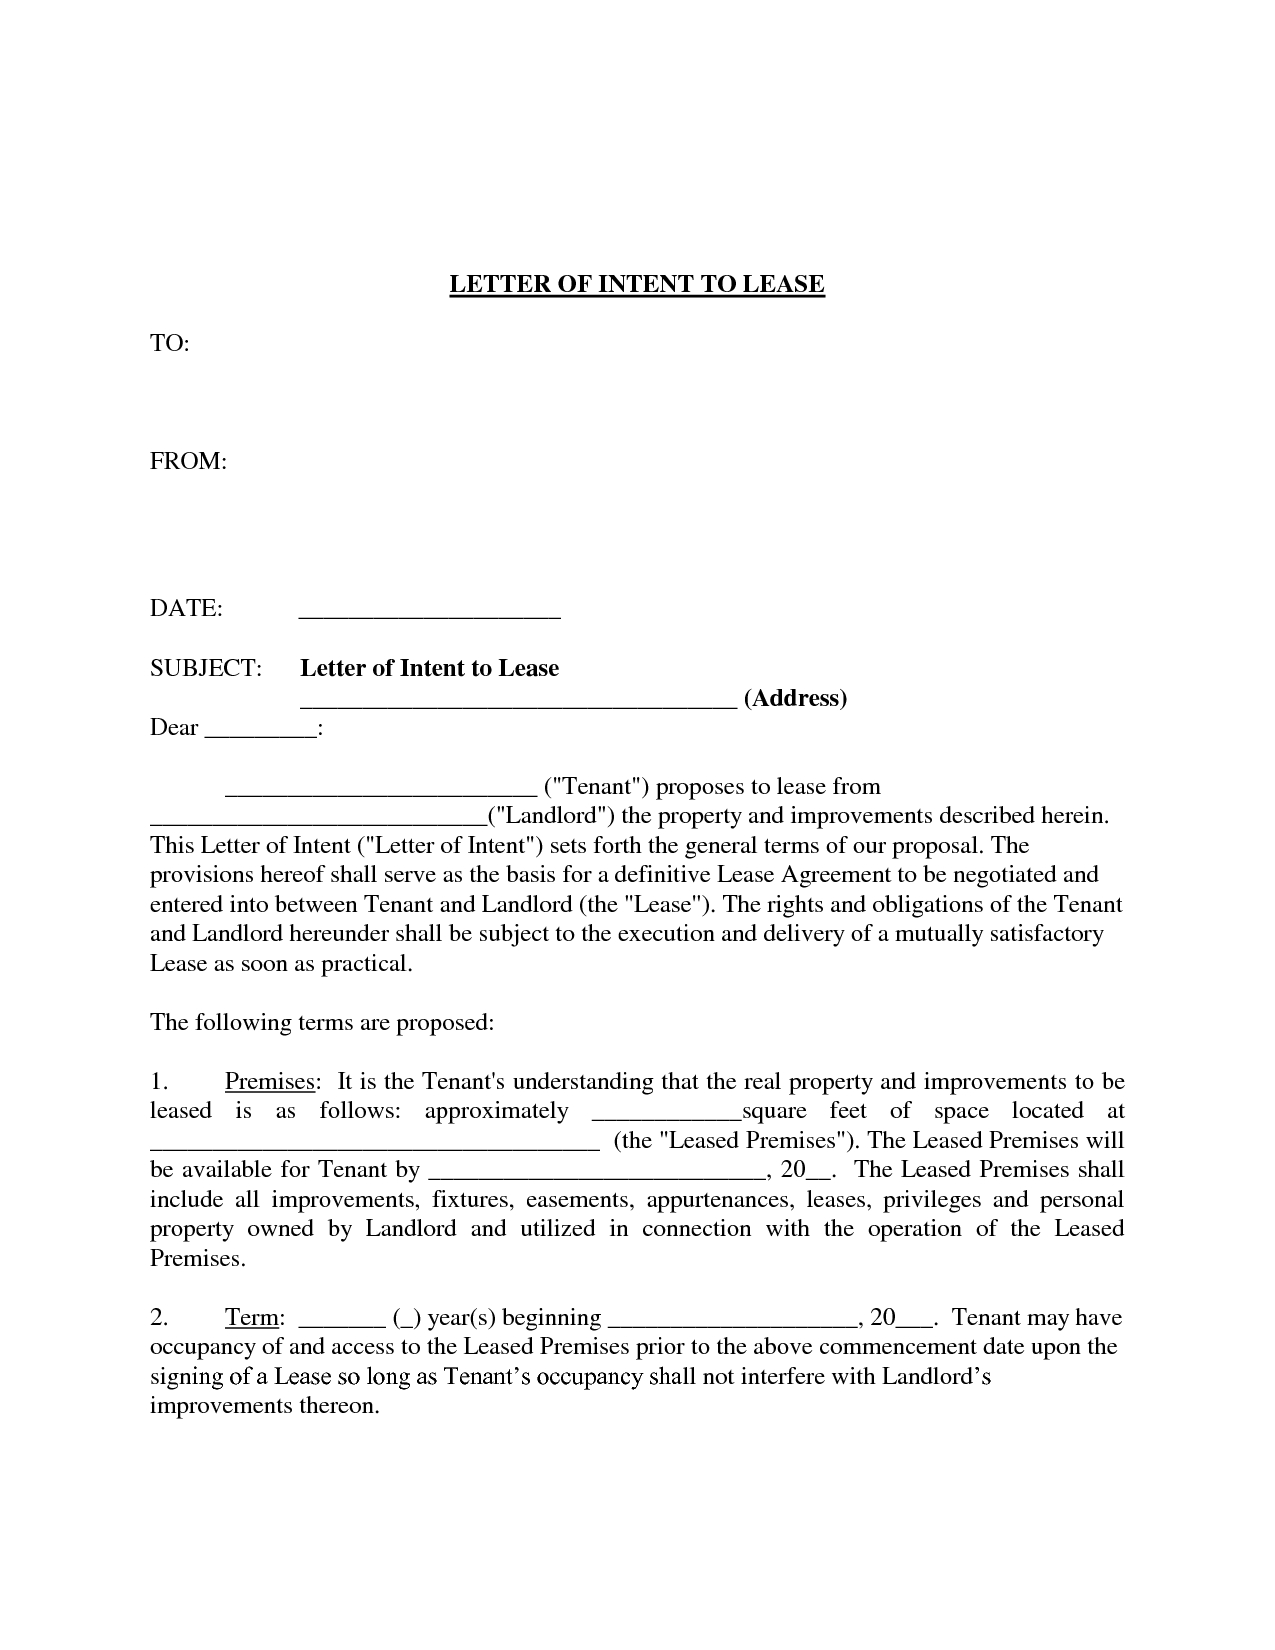 Letter Of Intent To Lease Pdf